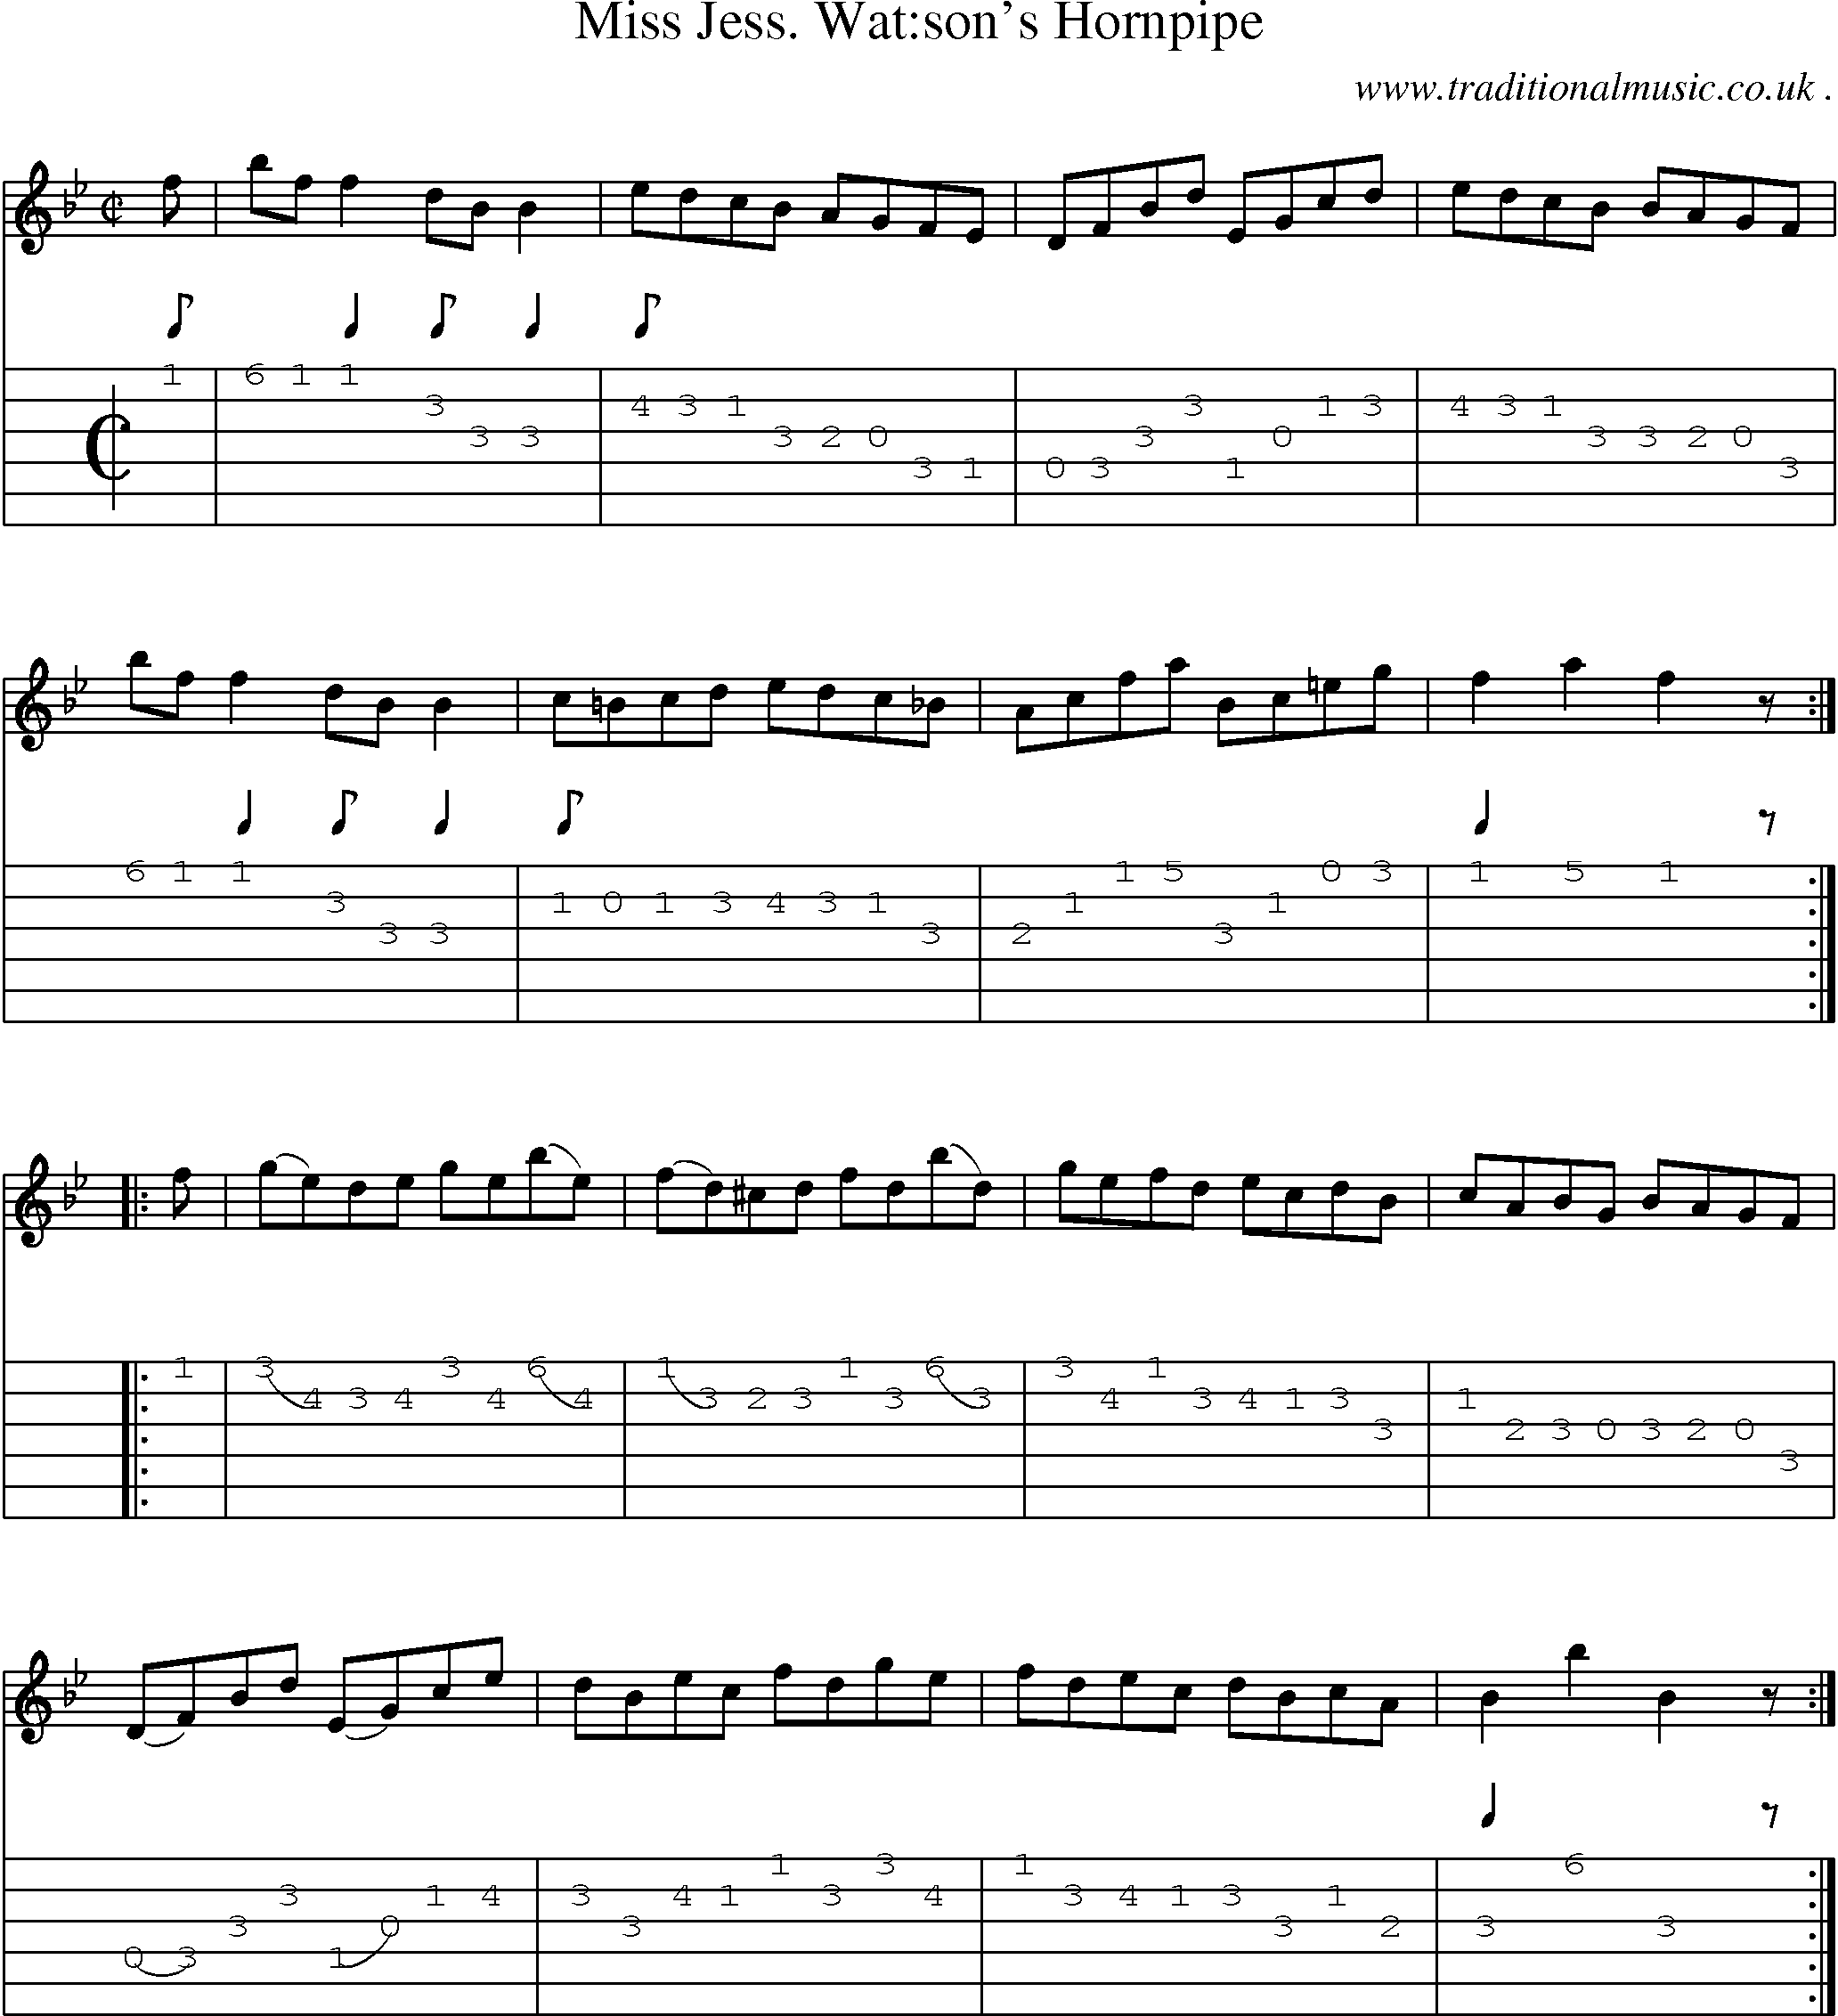 Sheet-Music and Guitar Tabs for Miss Jess Watsons Hornpipe